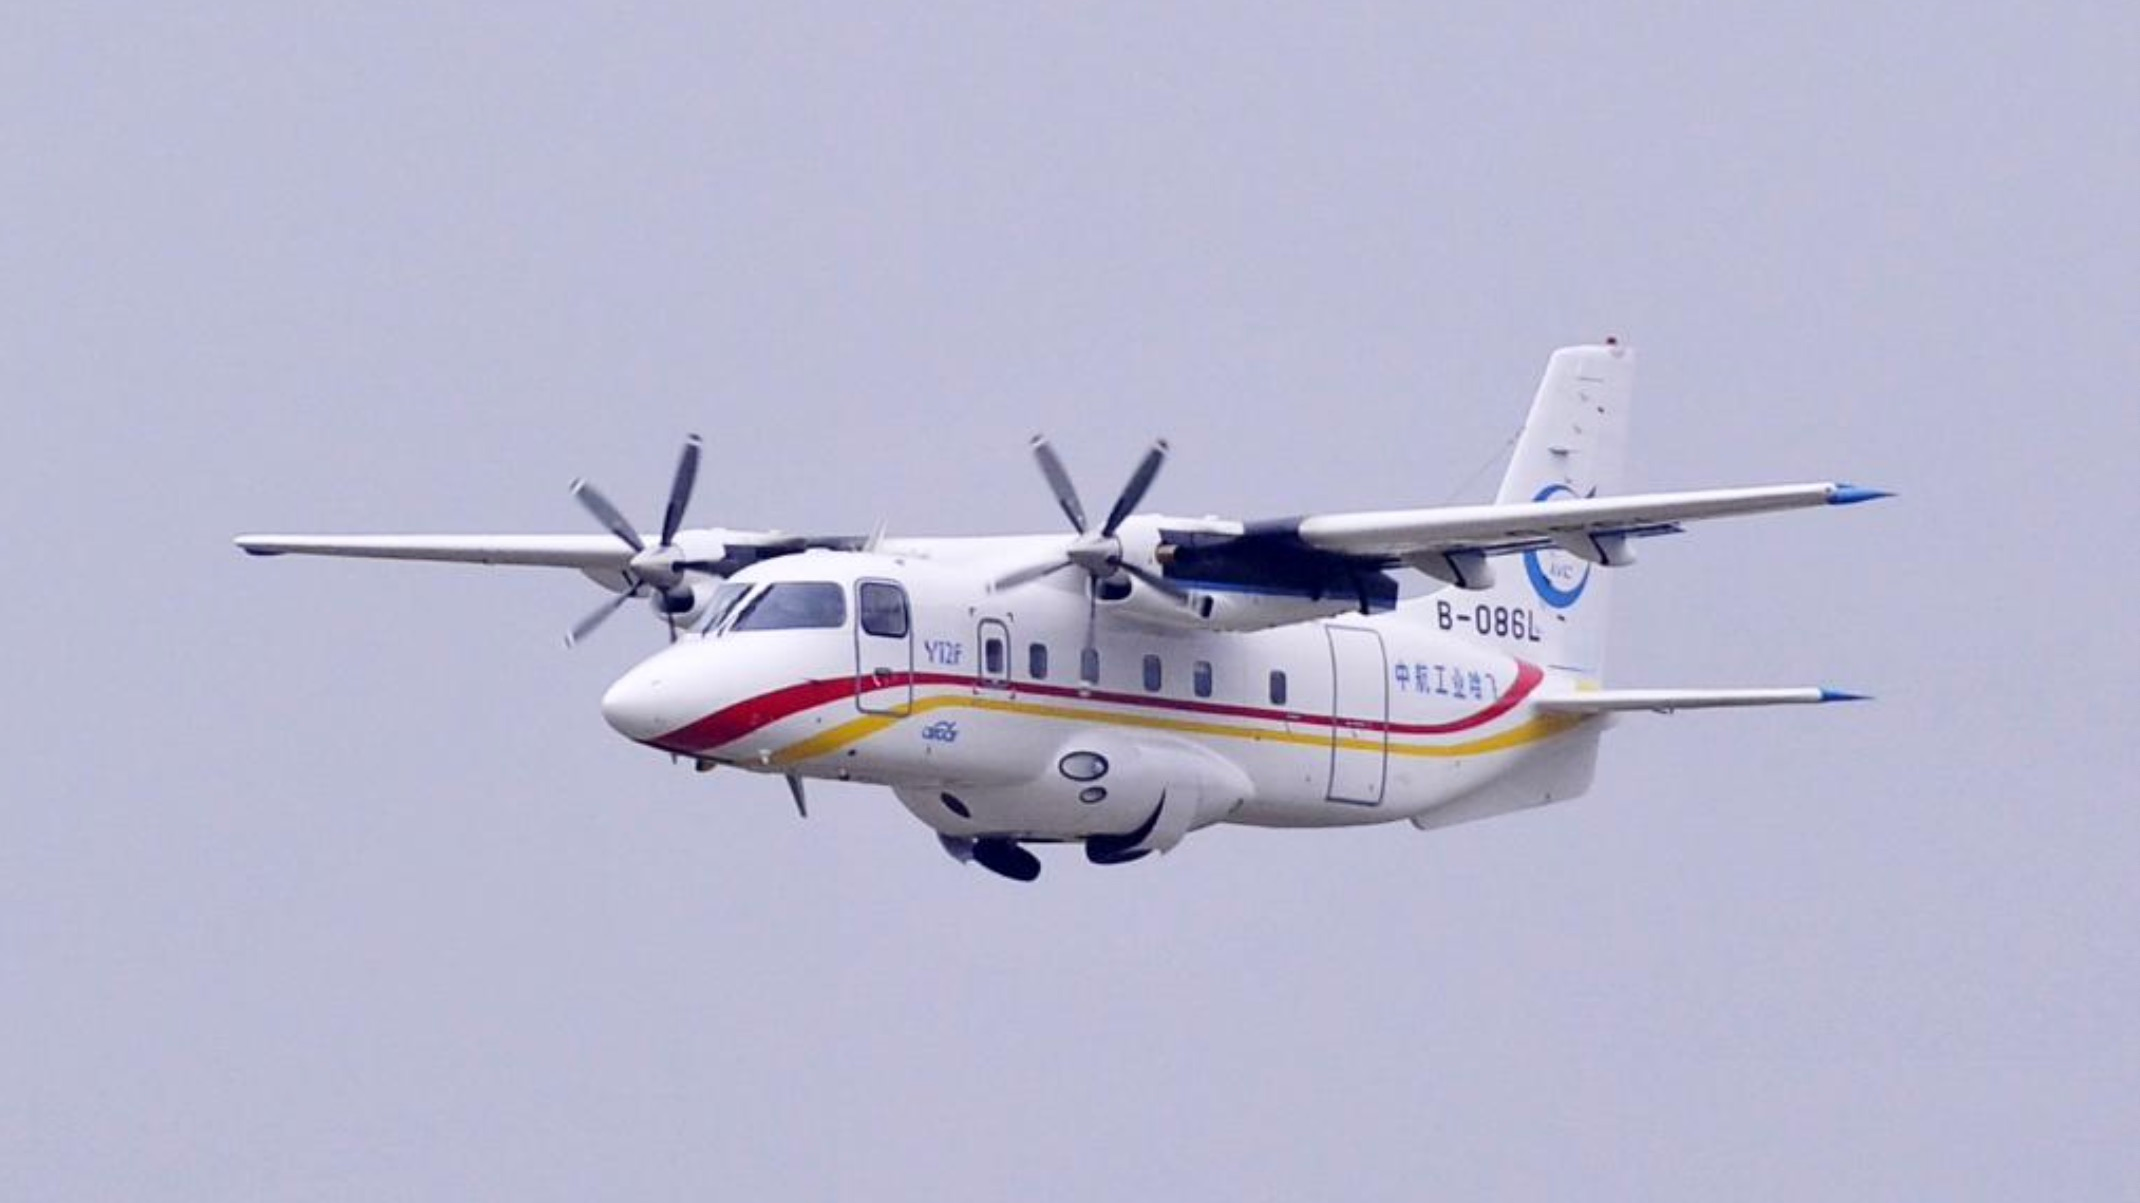 A Y-12F plane performs at the 10th China International Aviation and Aerospace Exhibition (Airshow China) in Zhuhai City, south China's Guangdong Province in 2014. /Xinhua